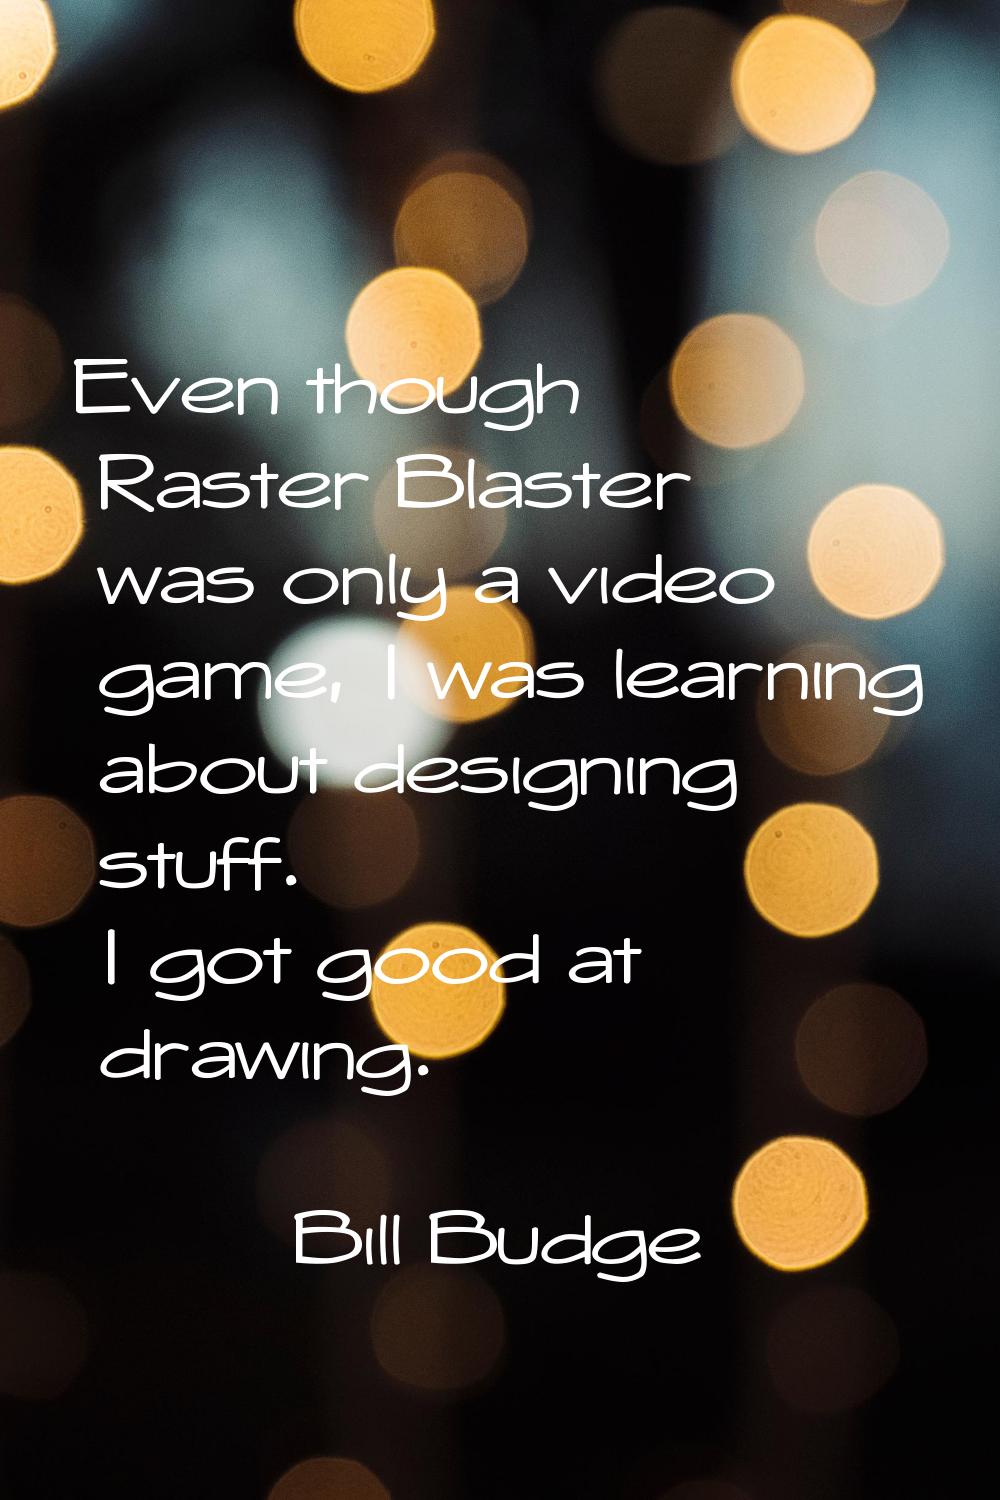 Even though Raster Blaster was only a video game, I was learning about designing stuff. I got good 